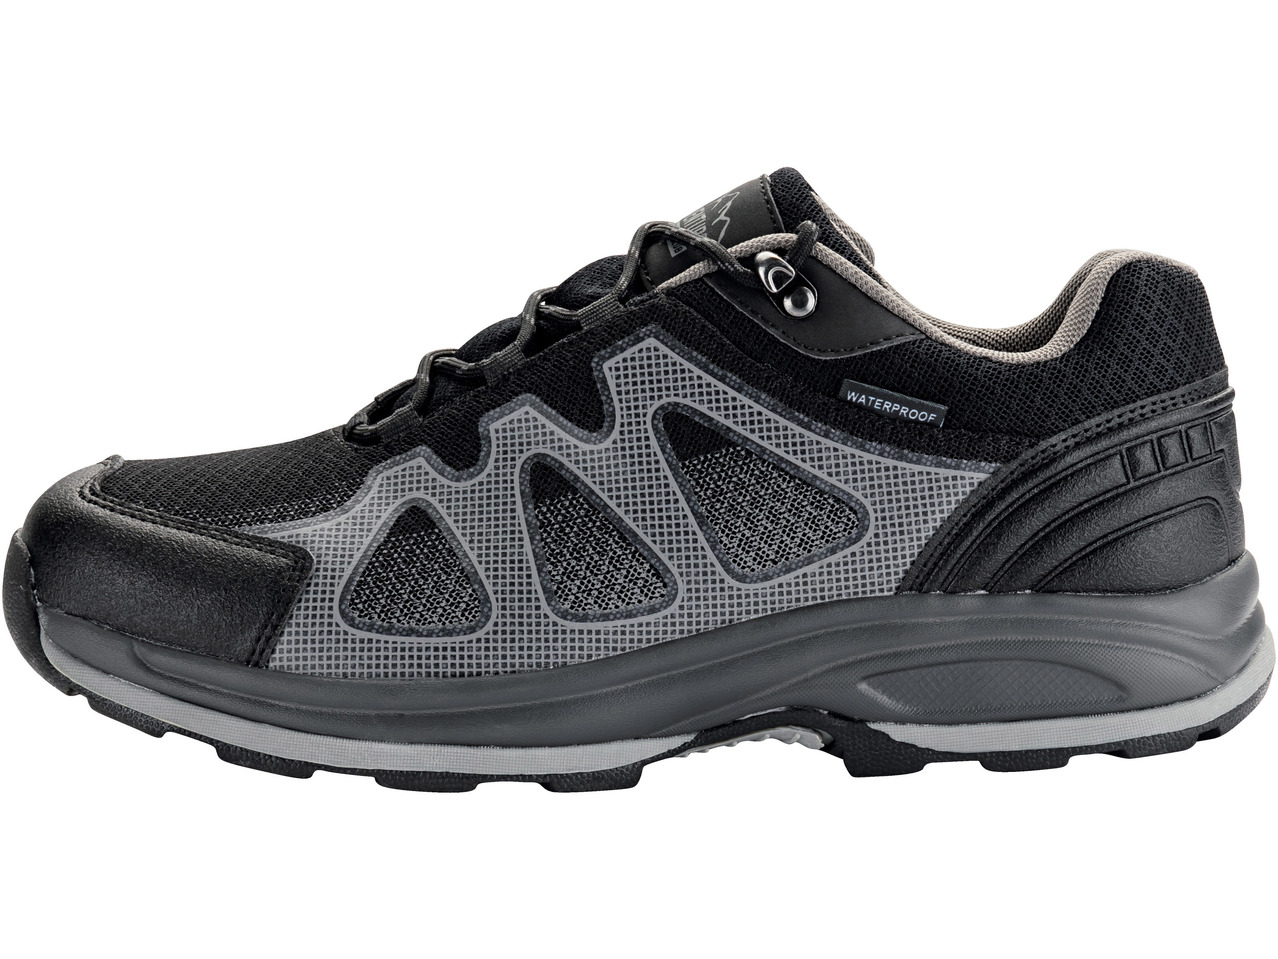 Men's Hiking Shoes - Lidl — Northern Ireland - Specials archive